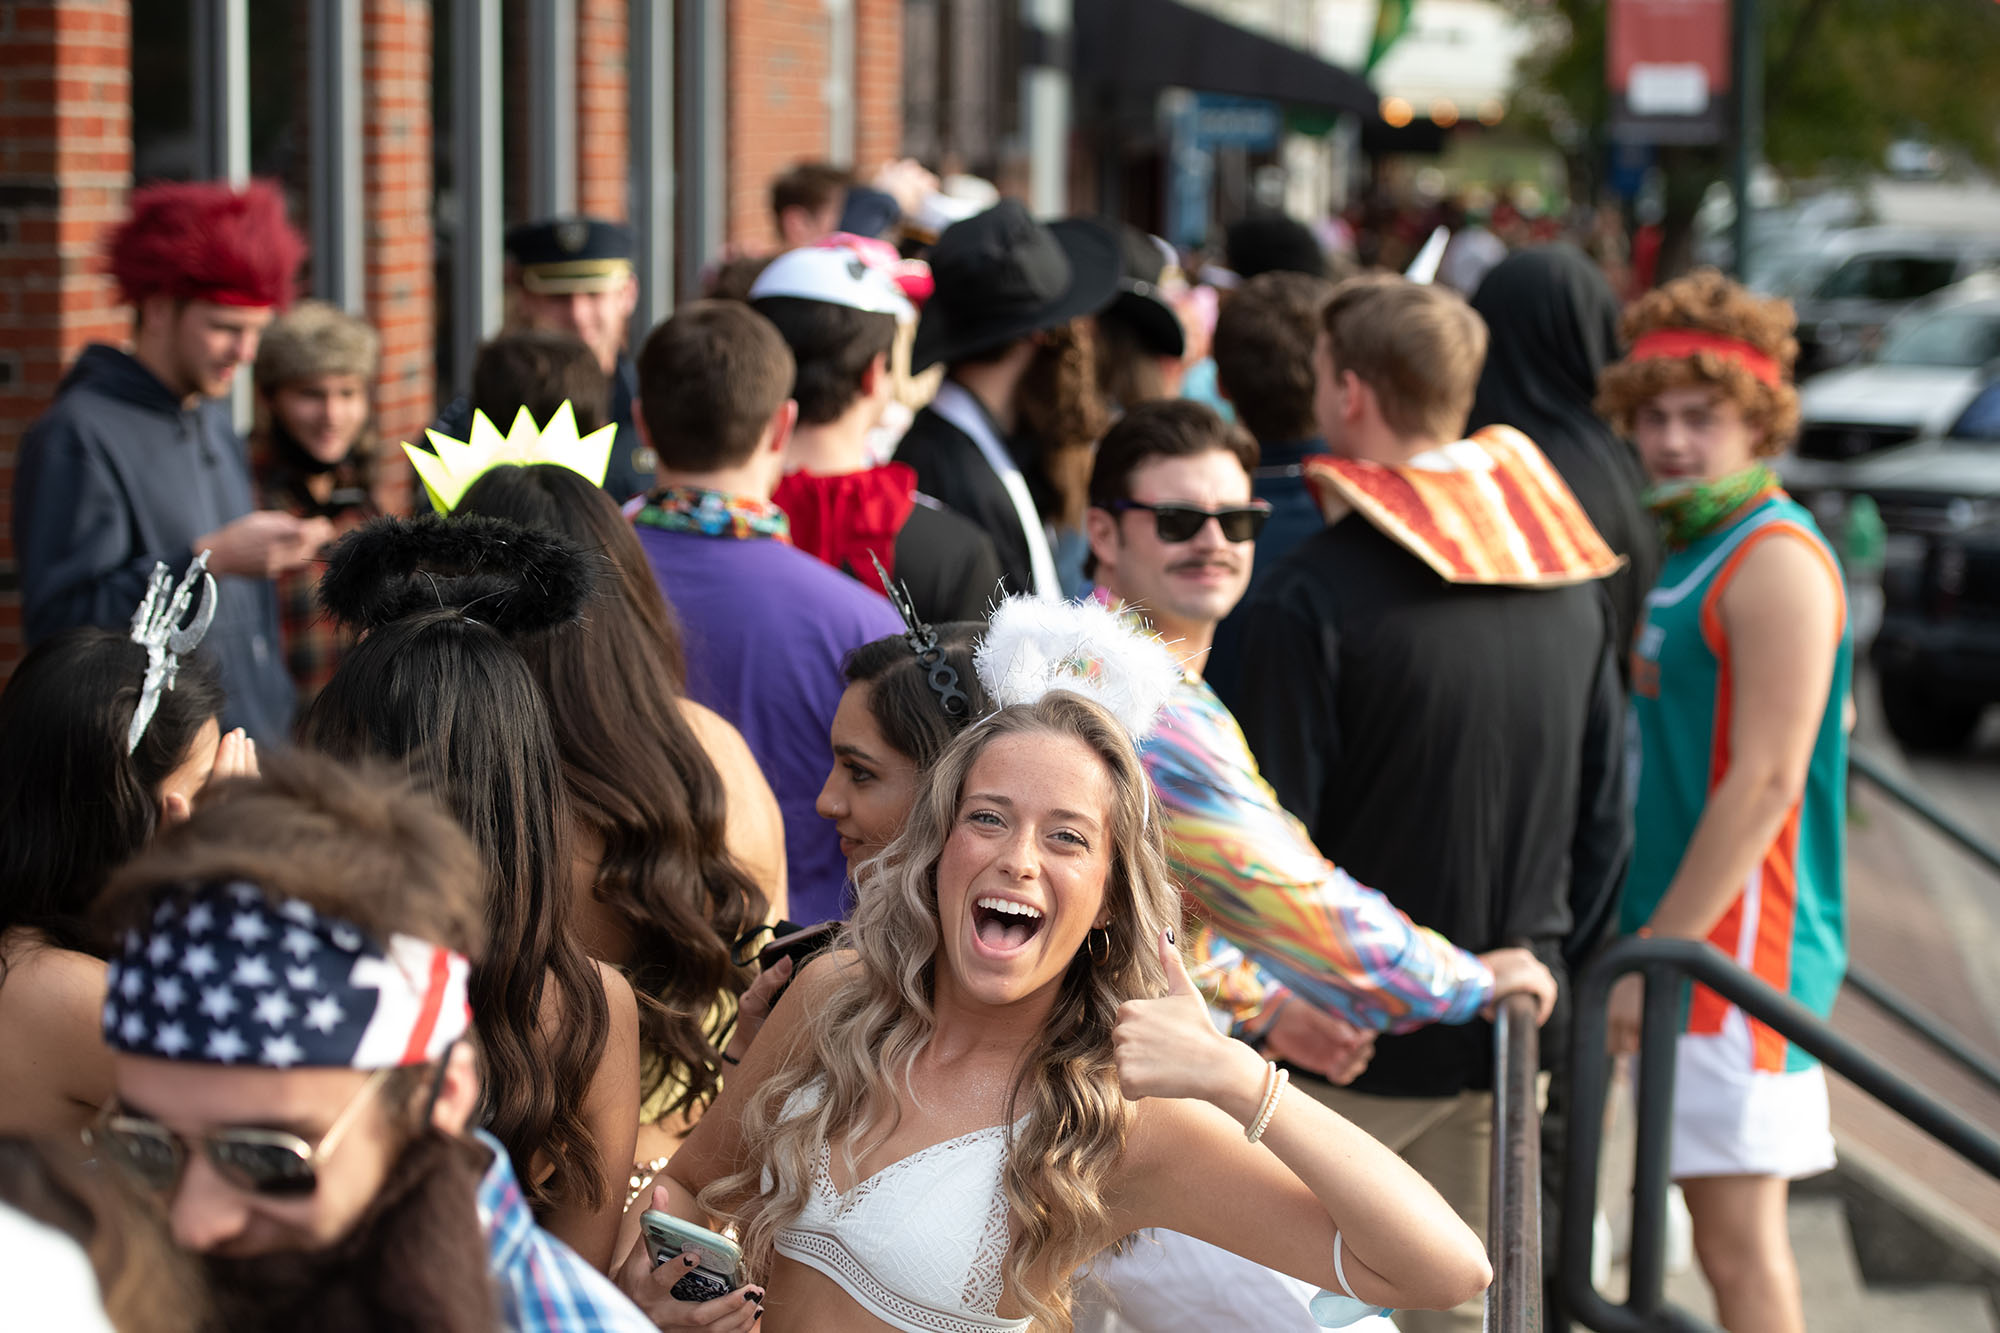 PHOTO: Halloween revelers stand in line for nightclubs in Five Points, a popular destination for college students at the University of South Carolina, in Columbia, S.C. on Oct. 31, 2020.